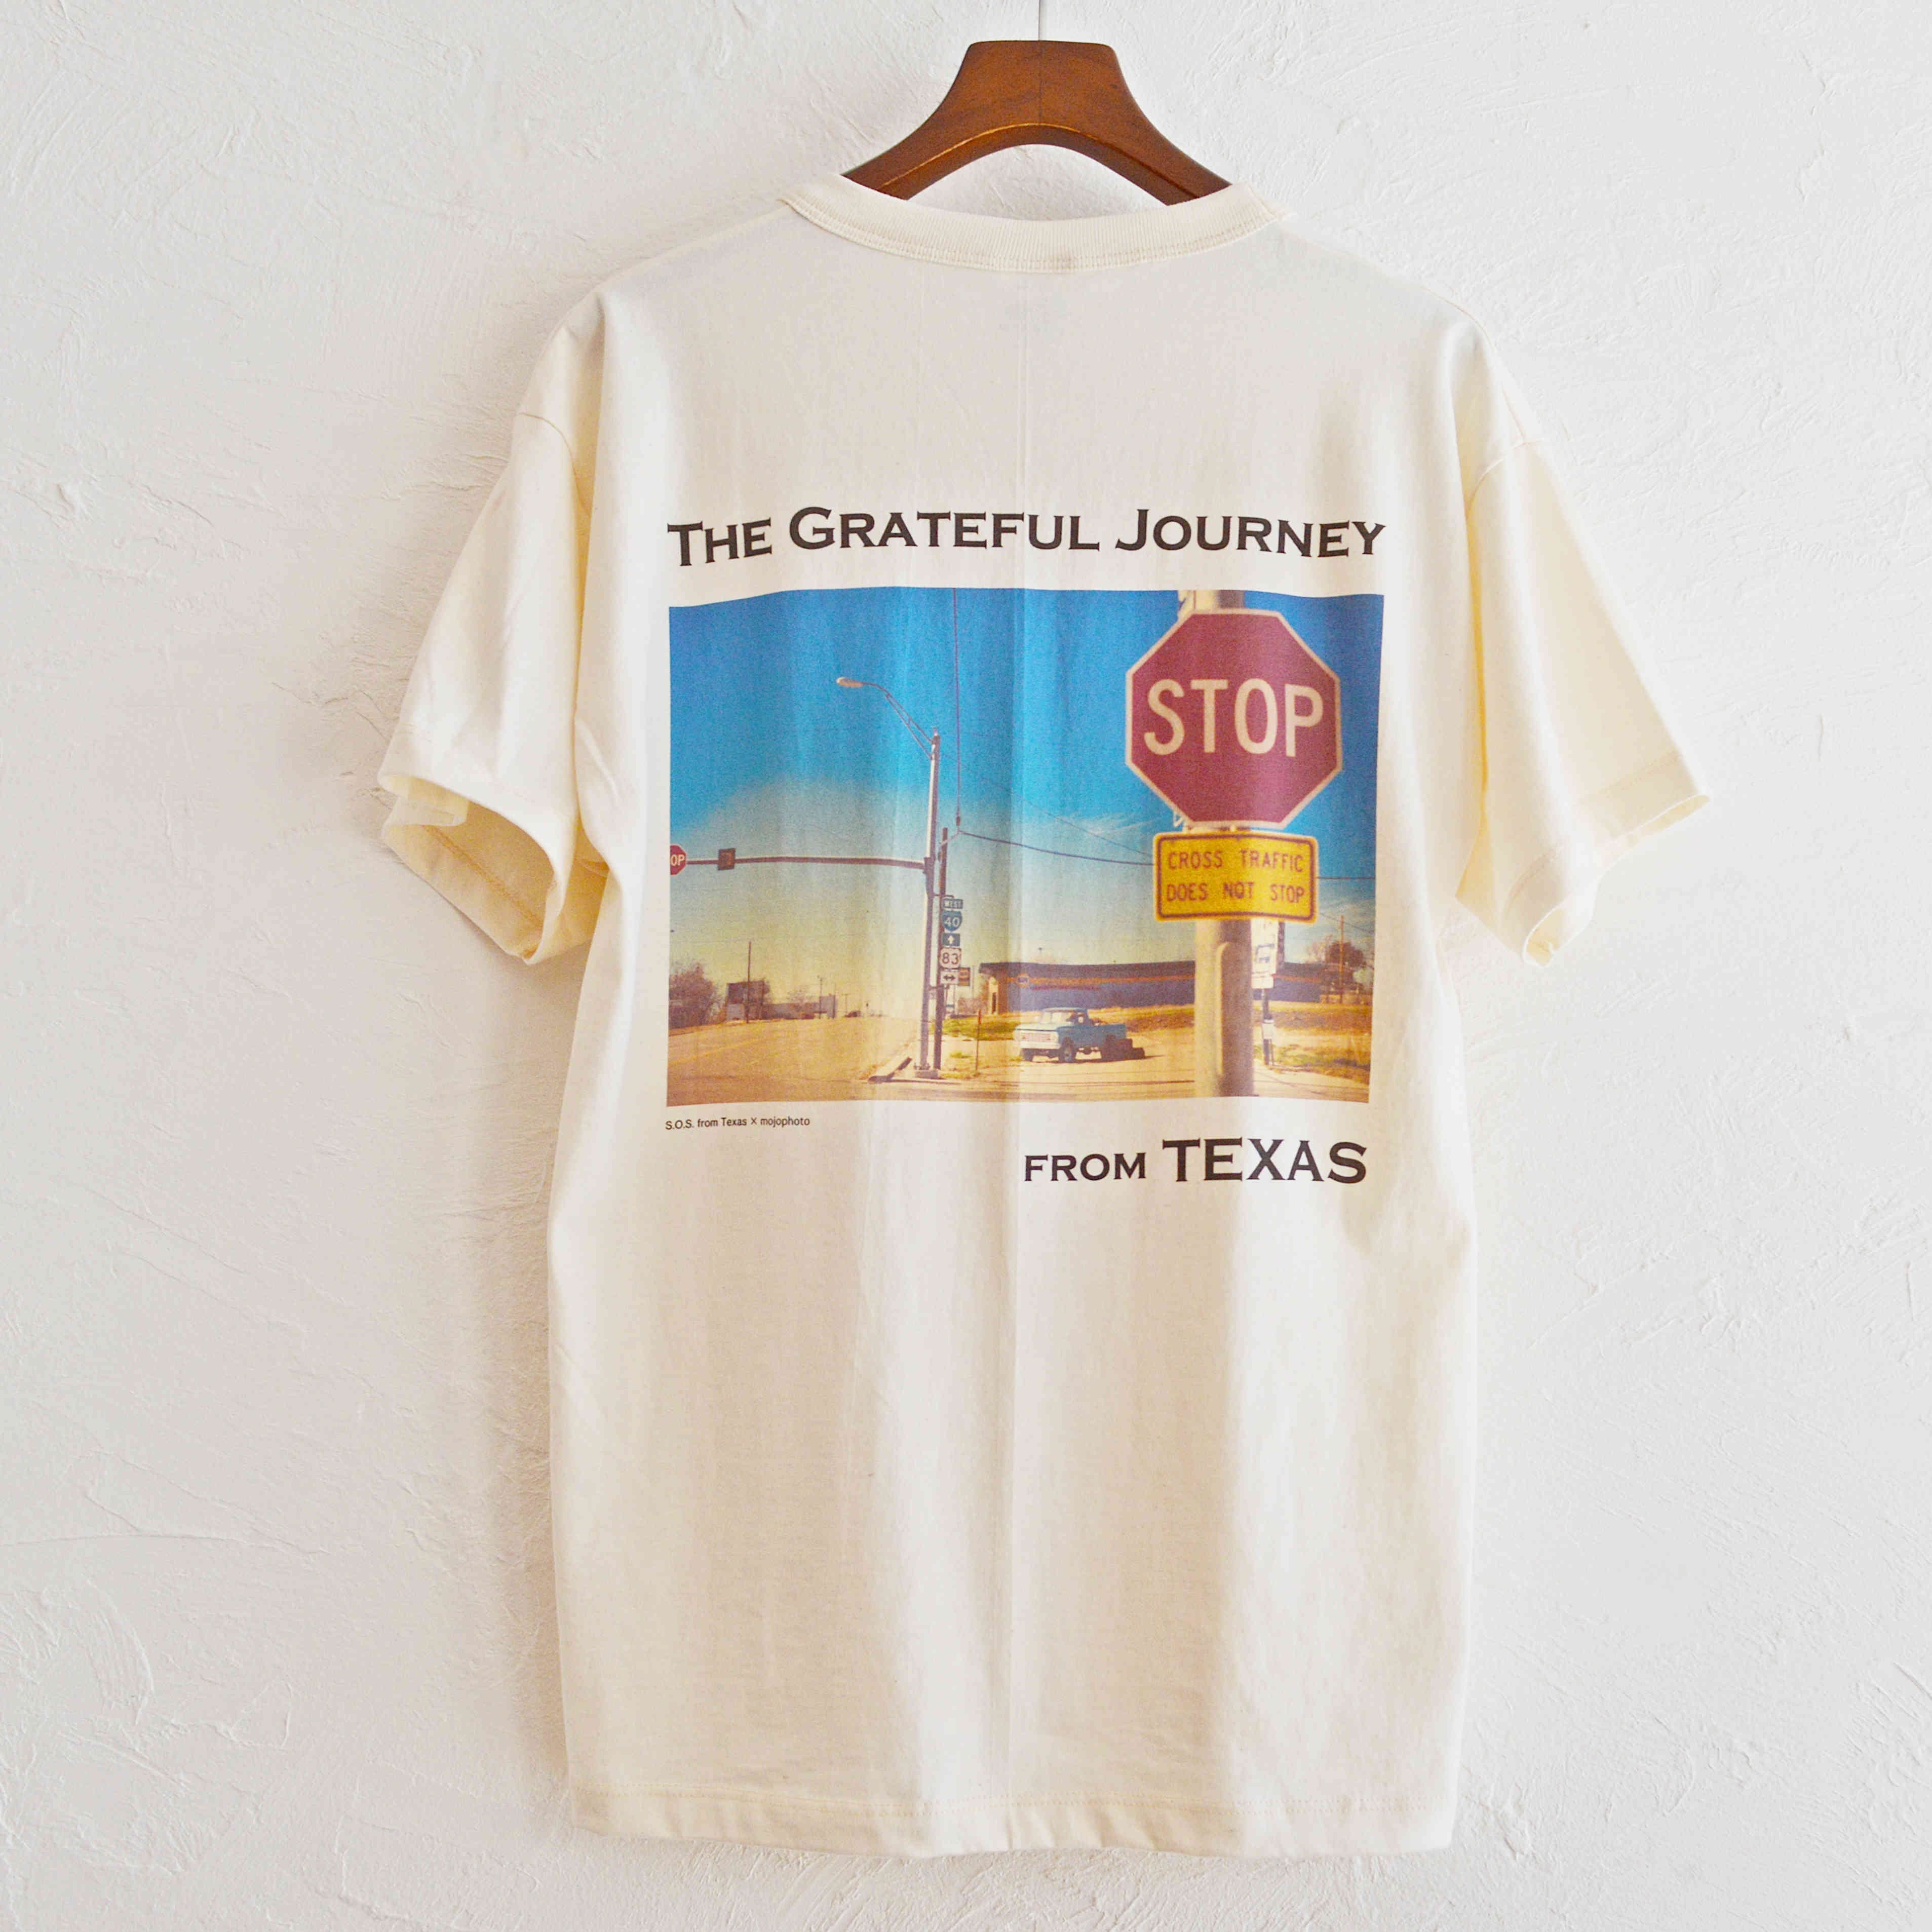 S.O.S. from Texas×mojophoto / ORGANIC COTTON 100% S/S CREW TEE THE GRATEFUL JOURNEY FROM TEXAS 『ROAD』